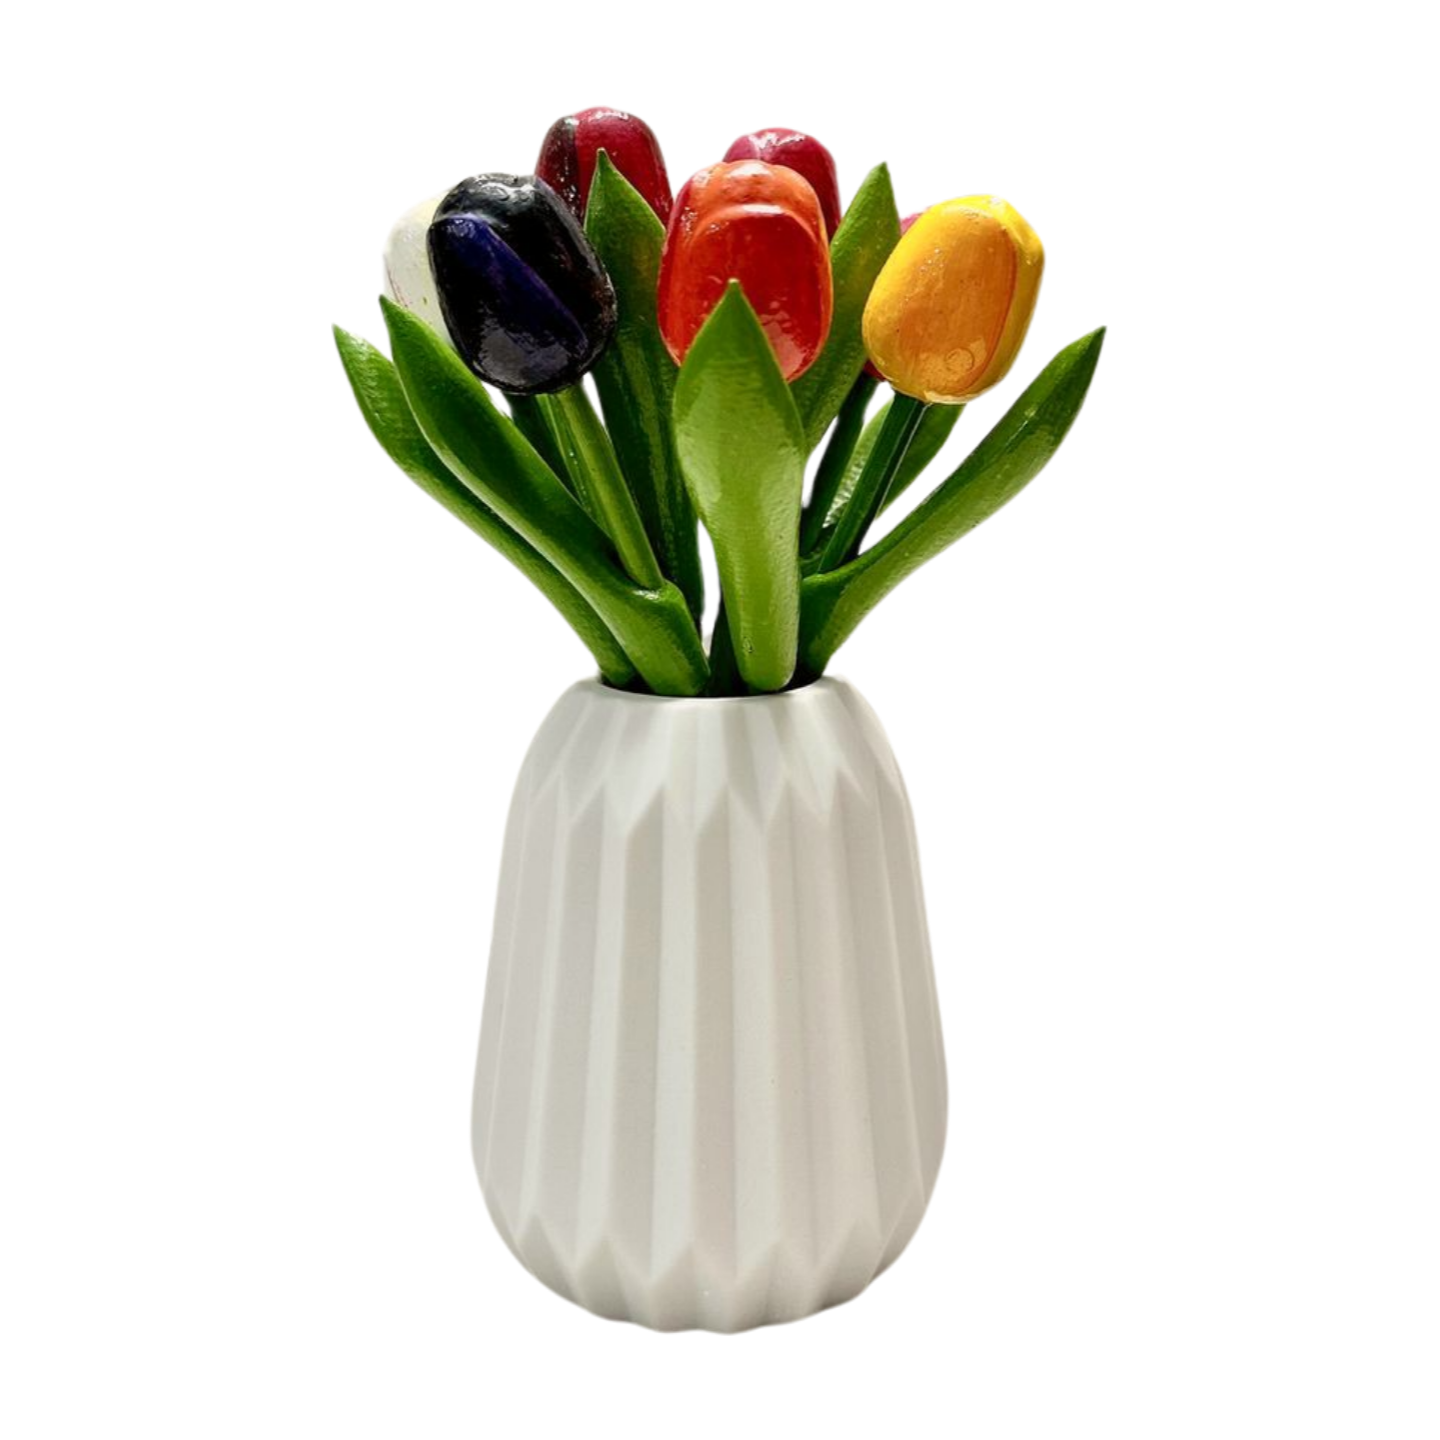 Mini wooden tulip bouquet in a white vase. Vase not included.